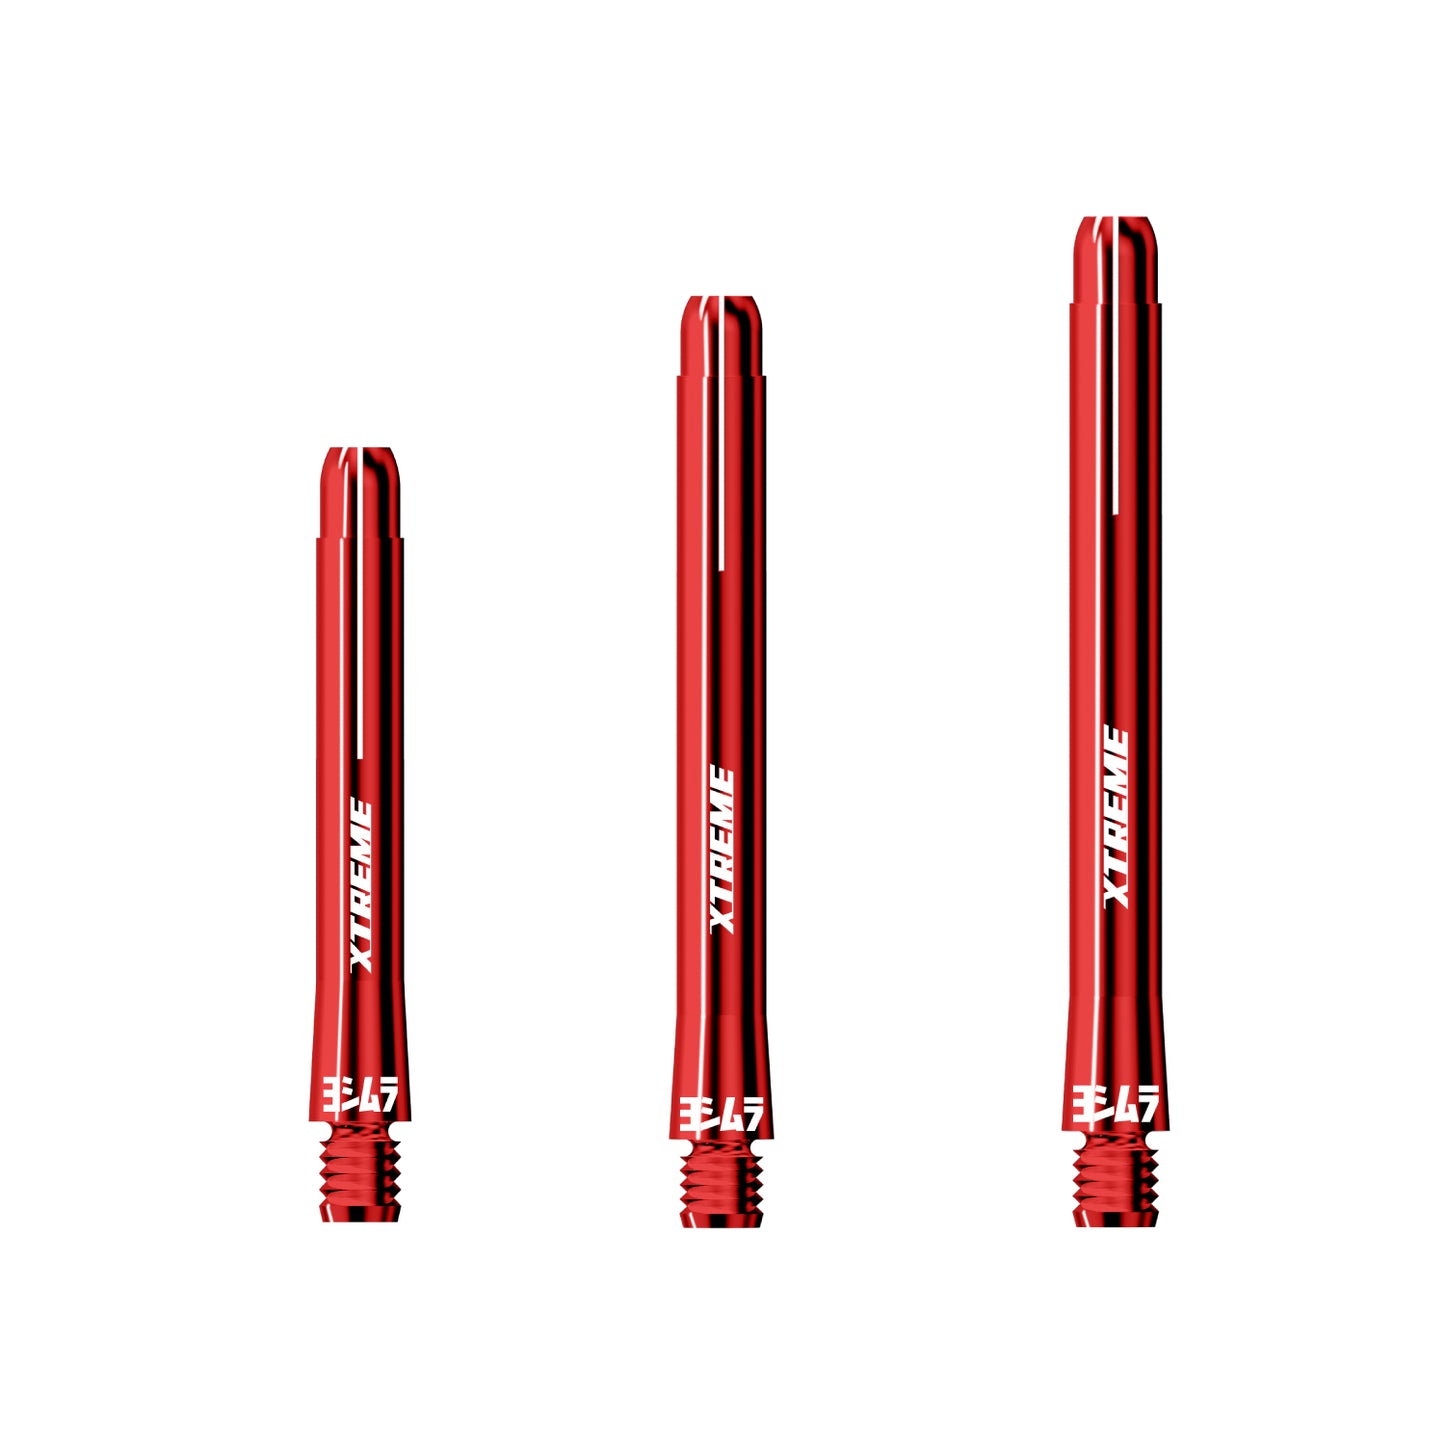 XTREME SHAFT STRAIGHT RED